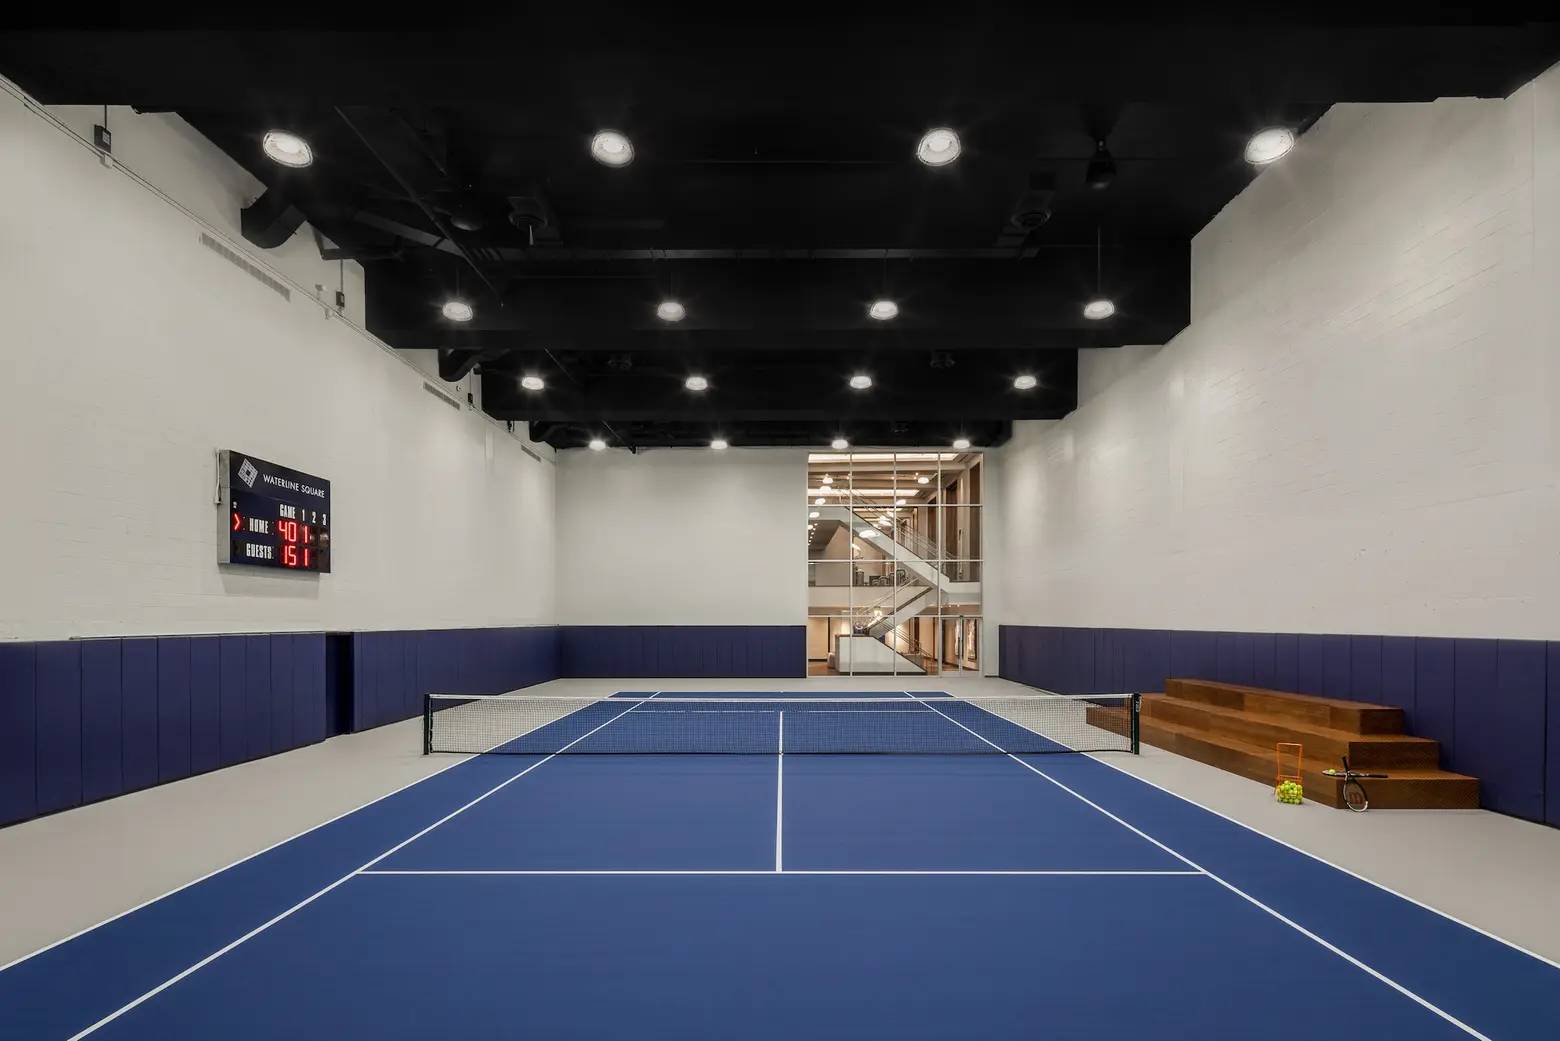 Waterline Square’s amenities include an indoor skate park, full tennis court, and a rock-climbing wall